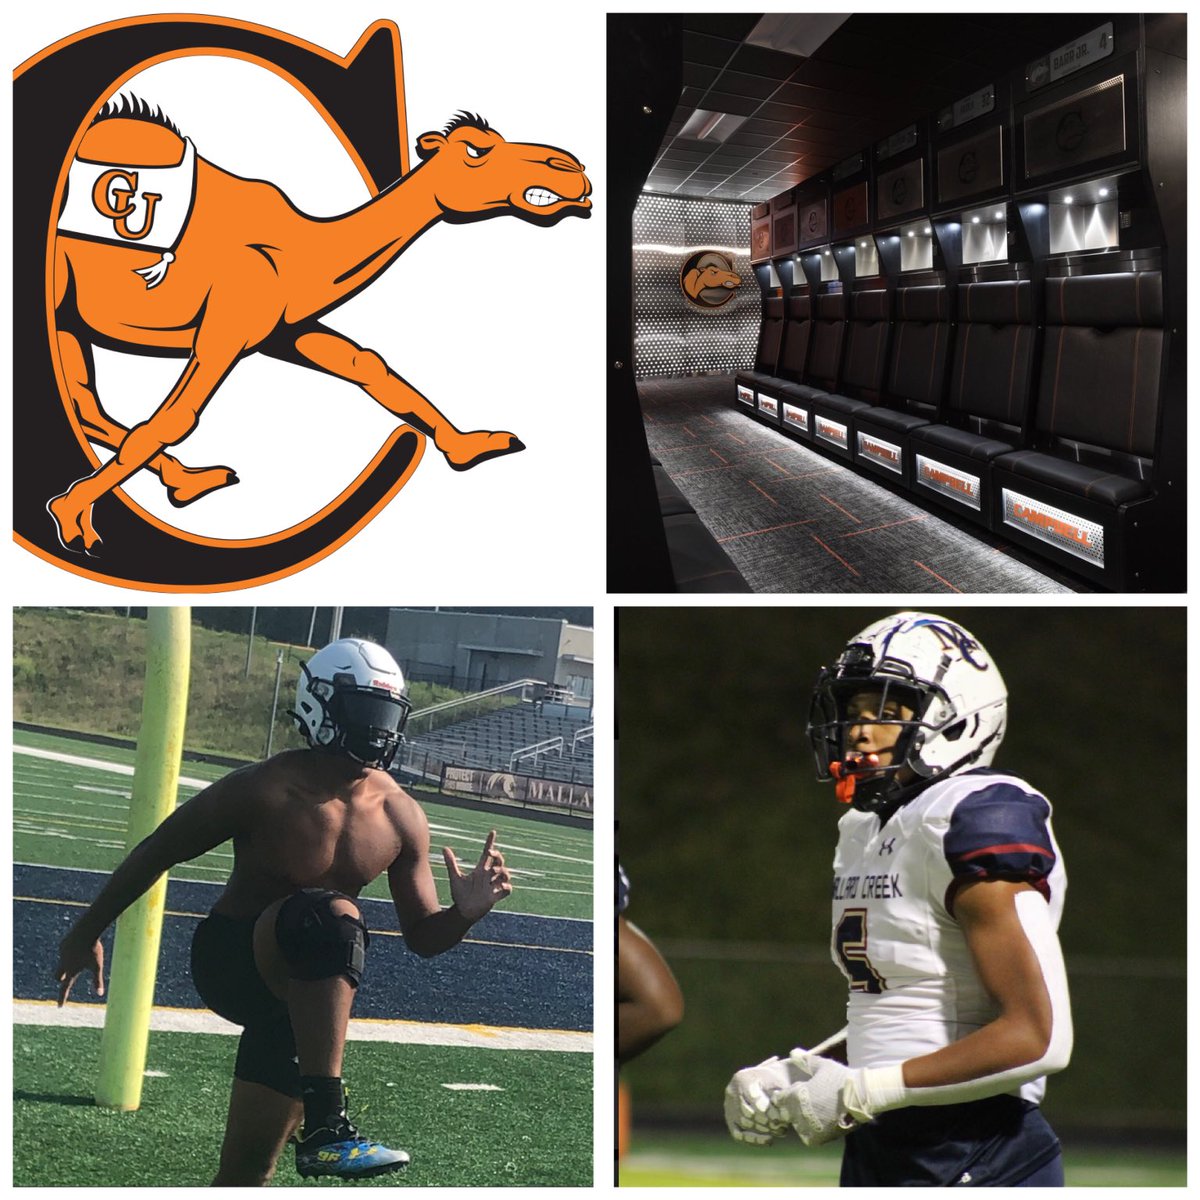 Things are heating up! 🔥🔥🔥⁦@mcmavsathletics⁩ Congrats to our edge guy ⁦@AliIshaun⁩ on his recent offer from ⁦@GoCamelsFB⁩ #Creekboyz Recruit The Creek